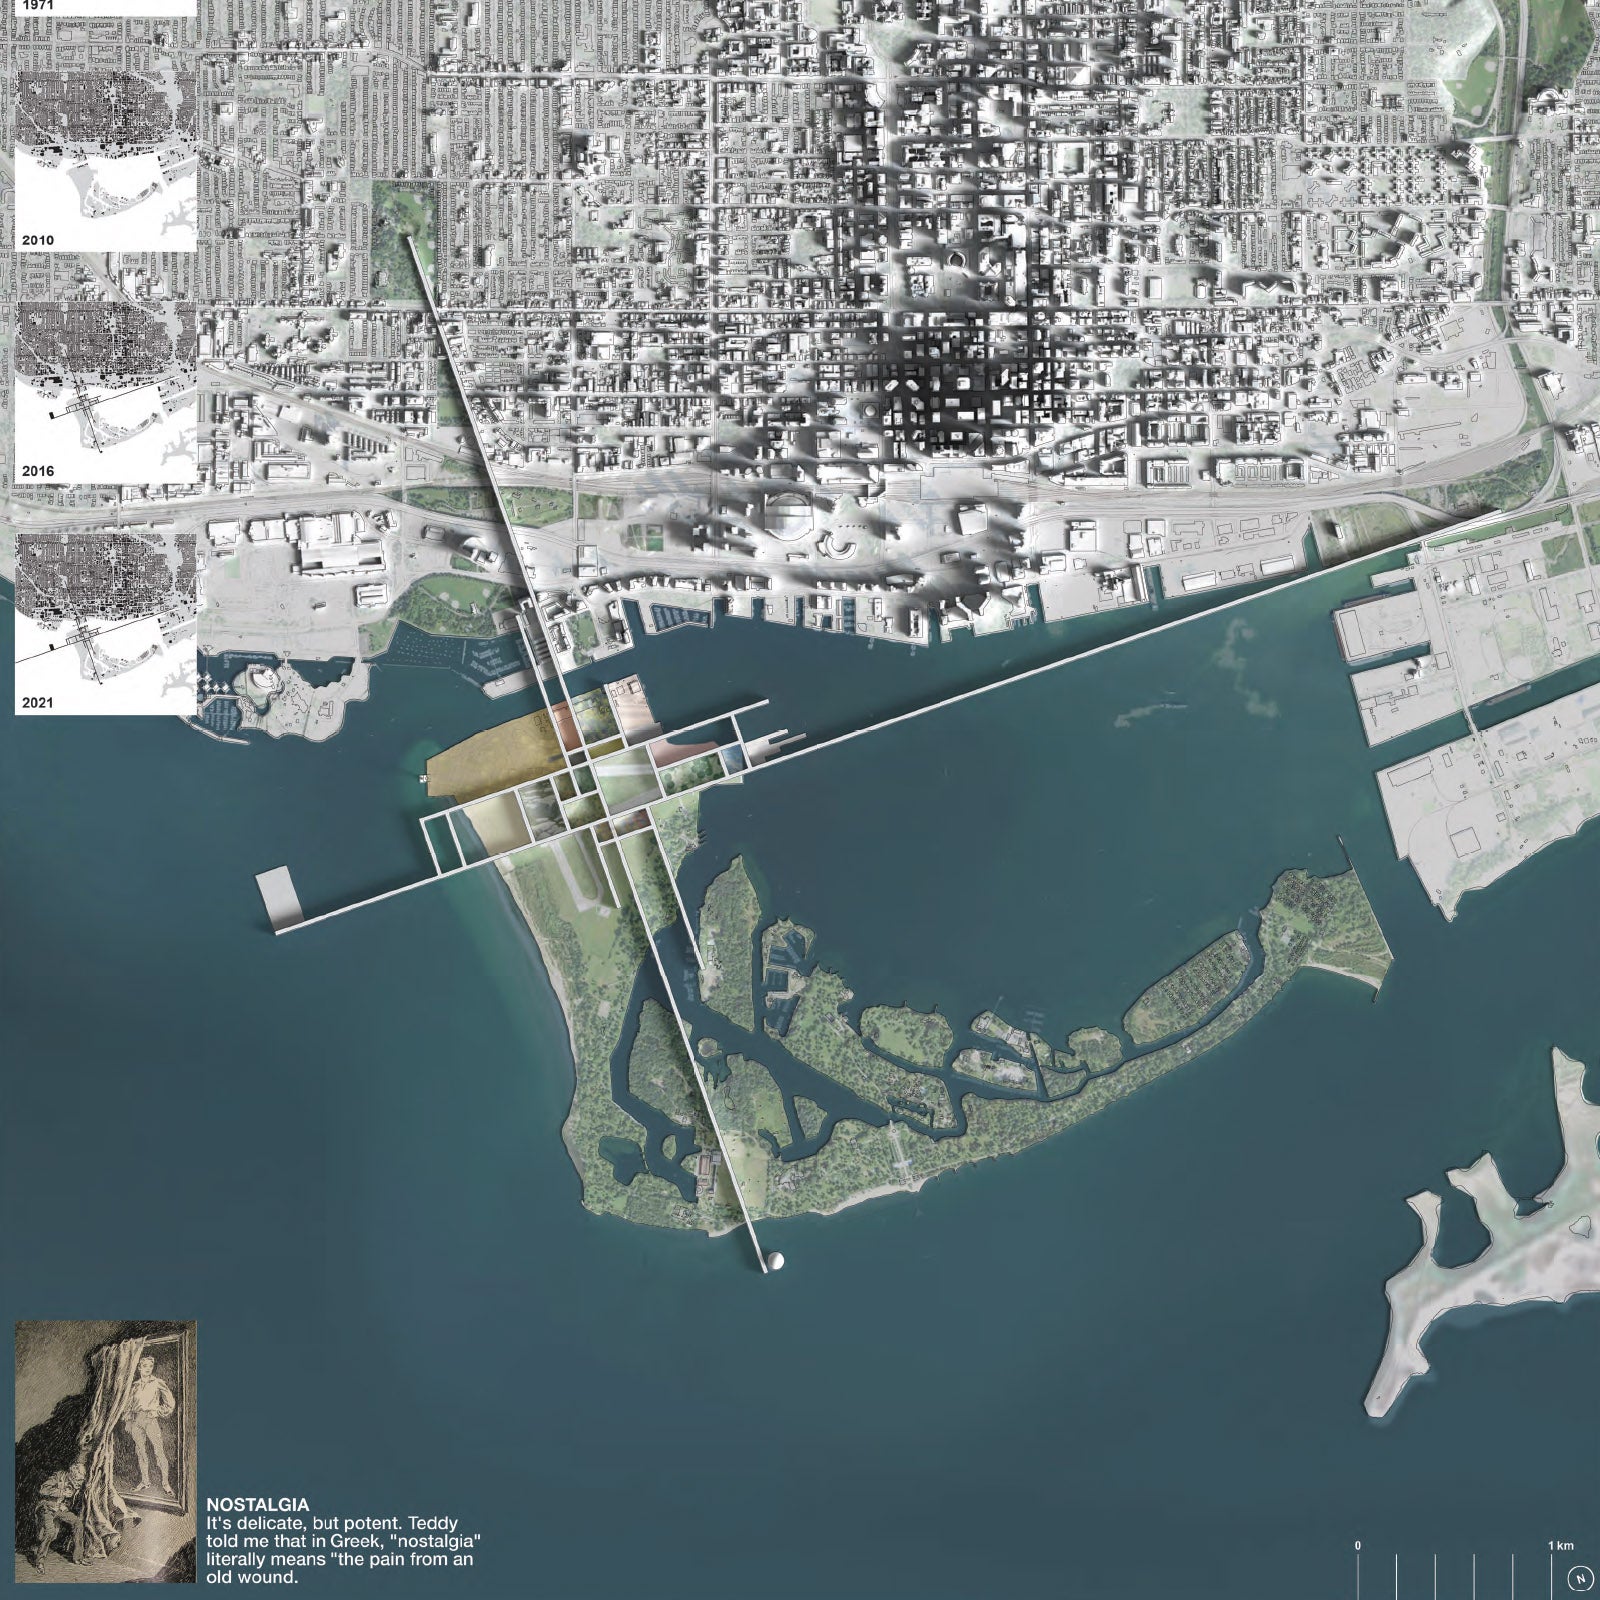 A satelite image/drawing of the Toronto island with the design overlay ontop of it.